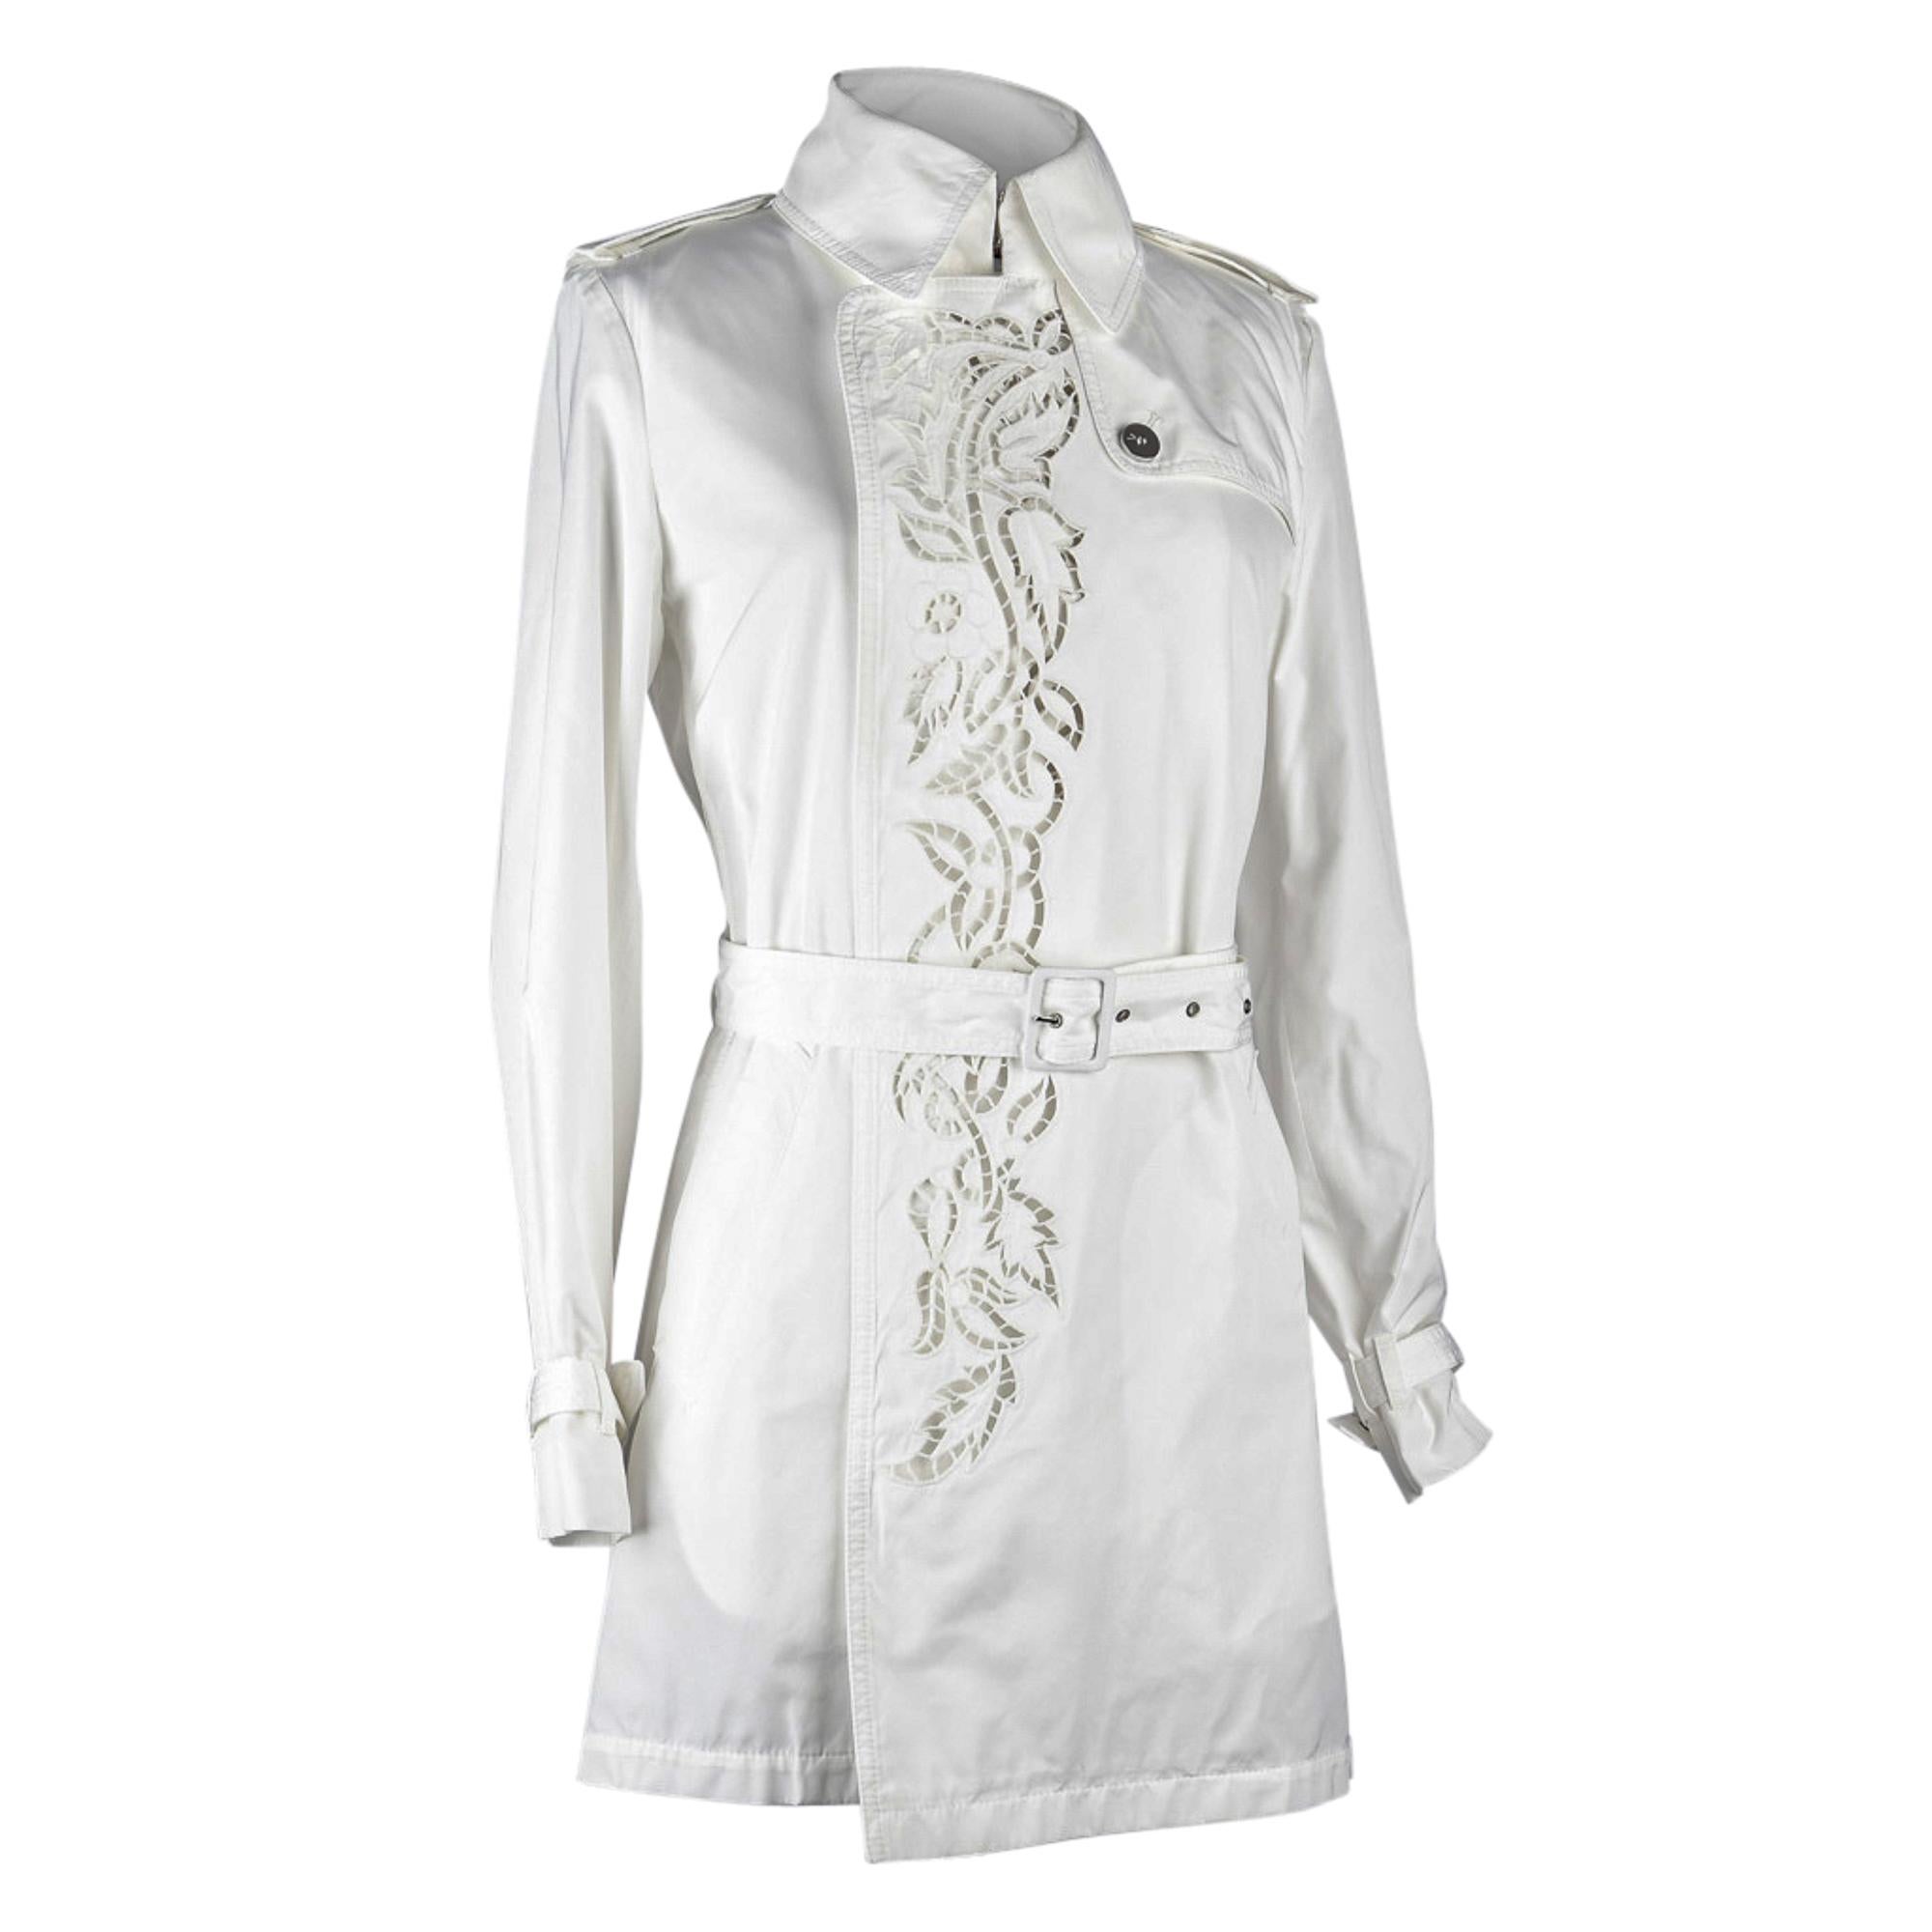 Guaranteed authentic Roberto Cavalli charming light winter white trench coat with silver buttoned epaulets. 
Beautiful laser cut lace effect detail down front of trench.
Classic collar, belt and straps at cuffs.
Back flap. 
Rear kick pleat.
NEW or